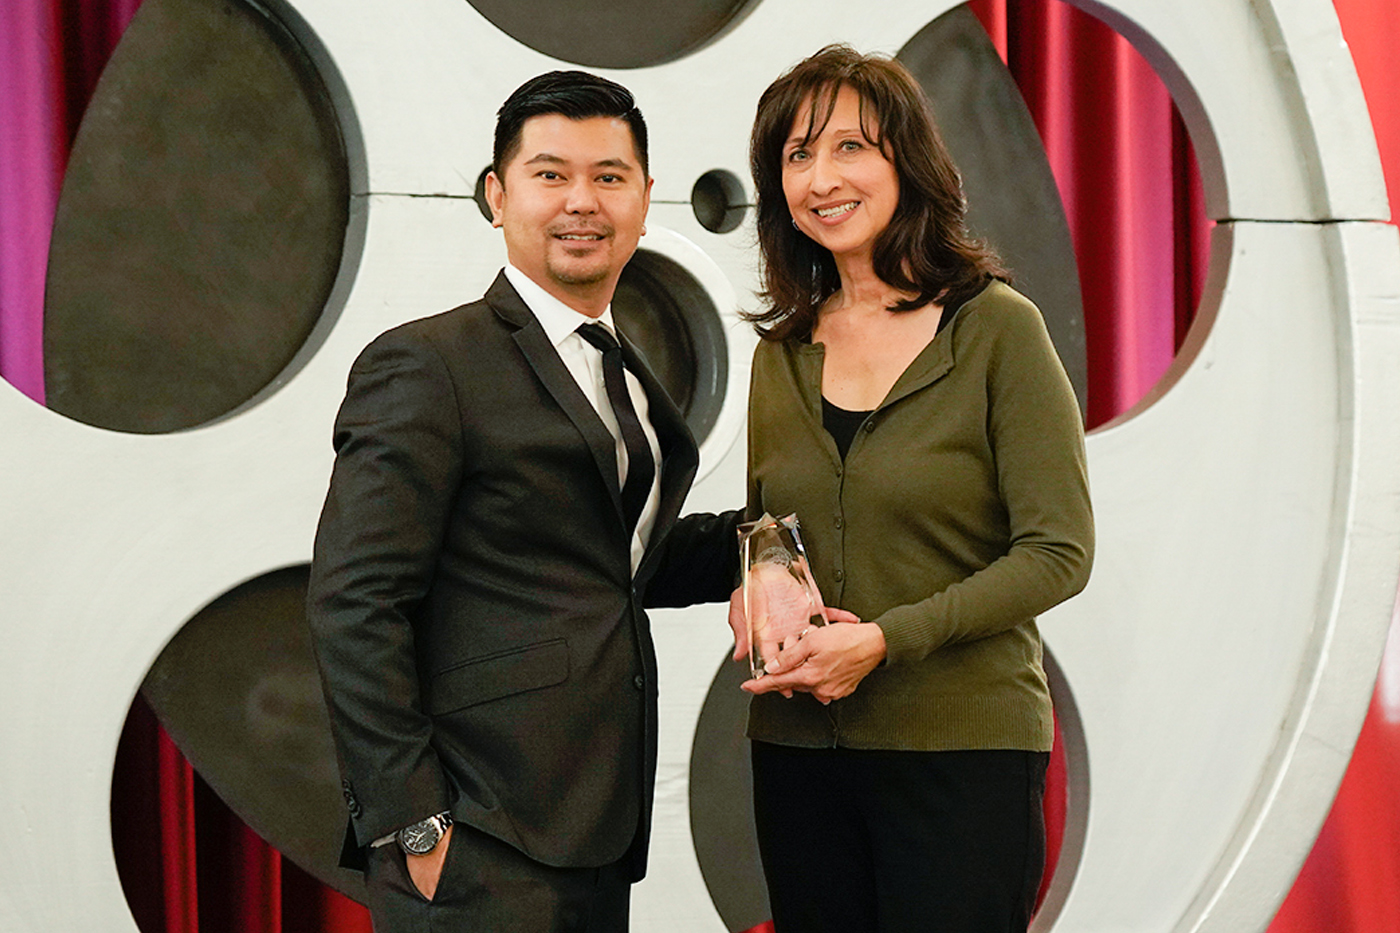 Darvin Manuel, Department of General Services, presents Yolanda Flores, Department of Corrections and Rehabilitation - North Kern State Prison, with the Gold Advocate of the Year Award.